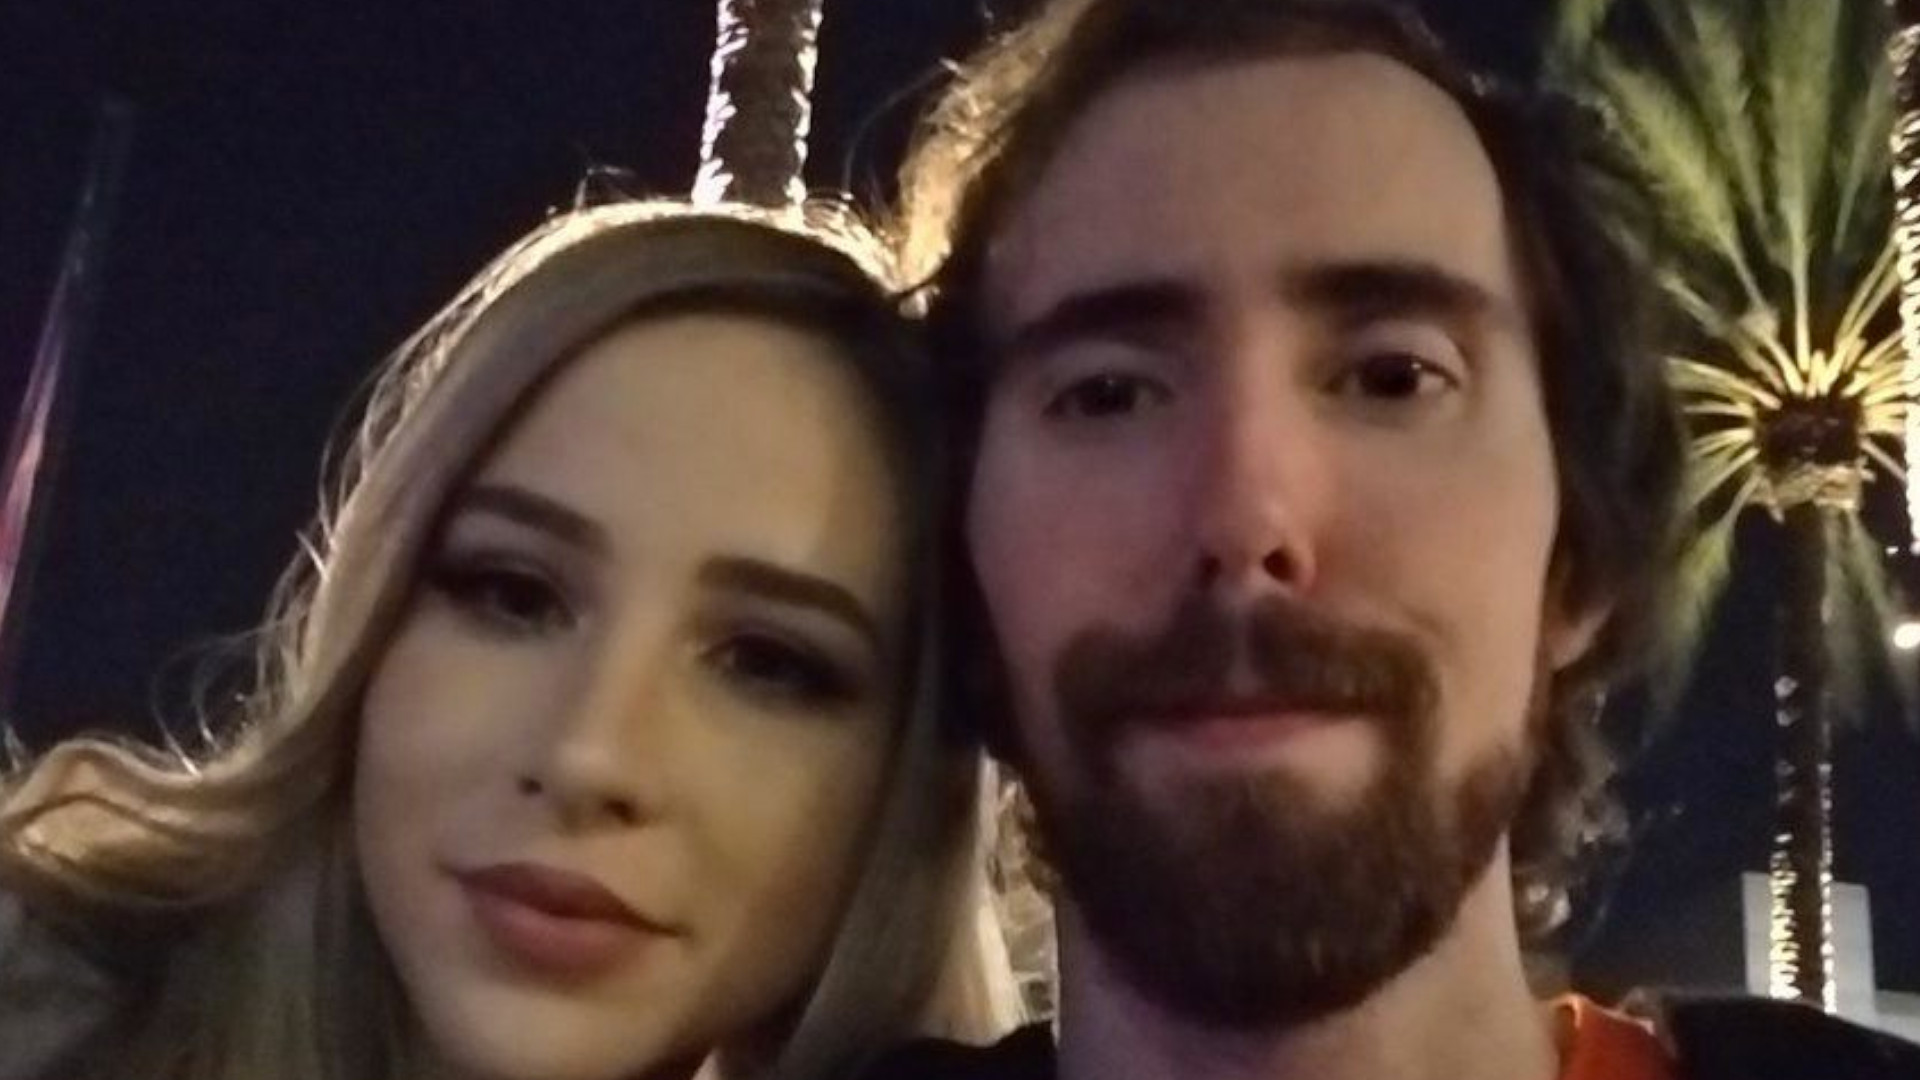 Twitch's flagship nerd can't have a girlfriend: "I want him to be miserable and lonely like me."